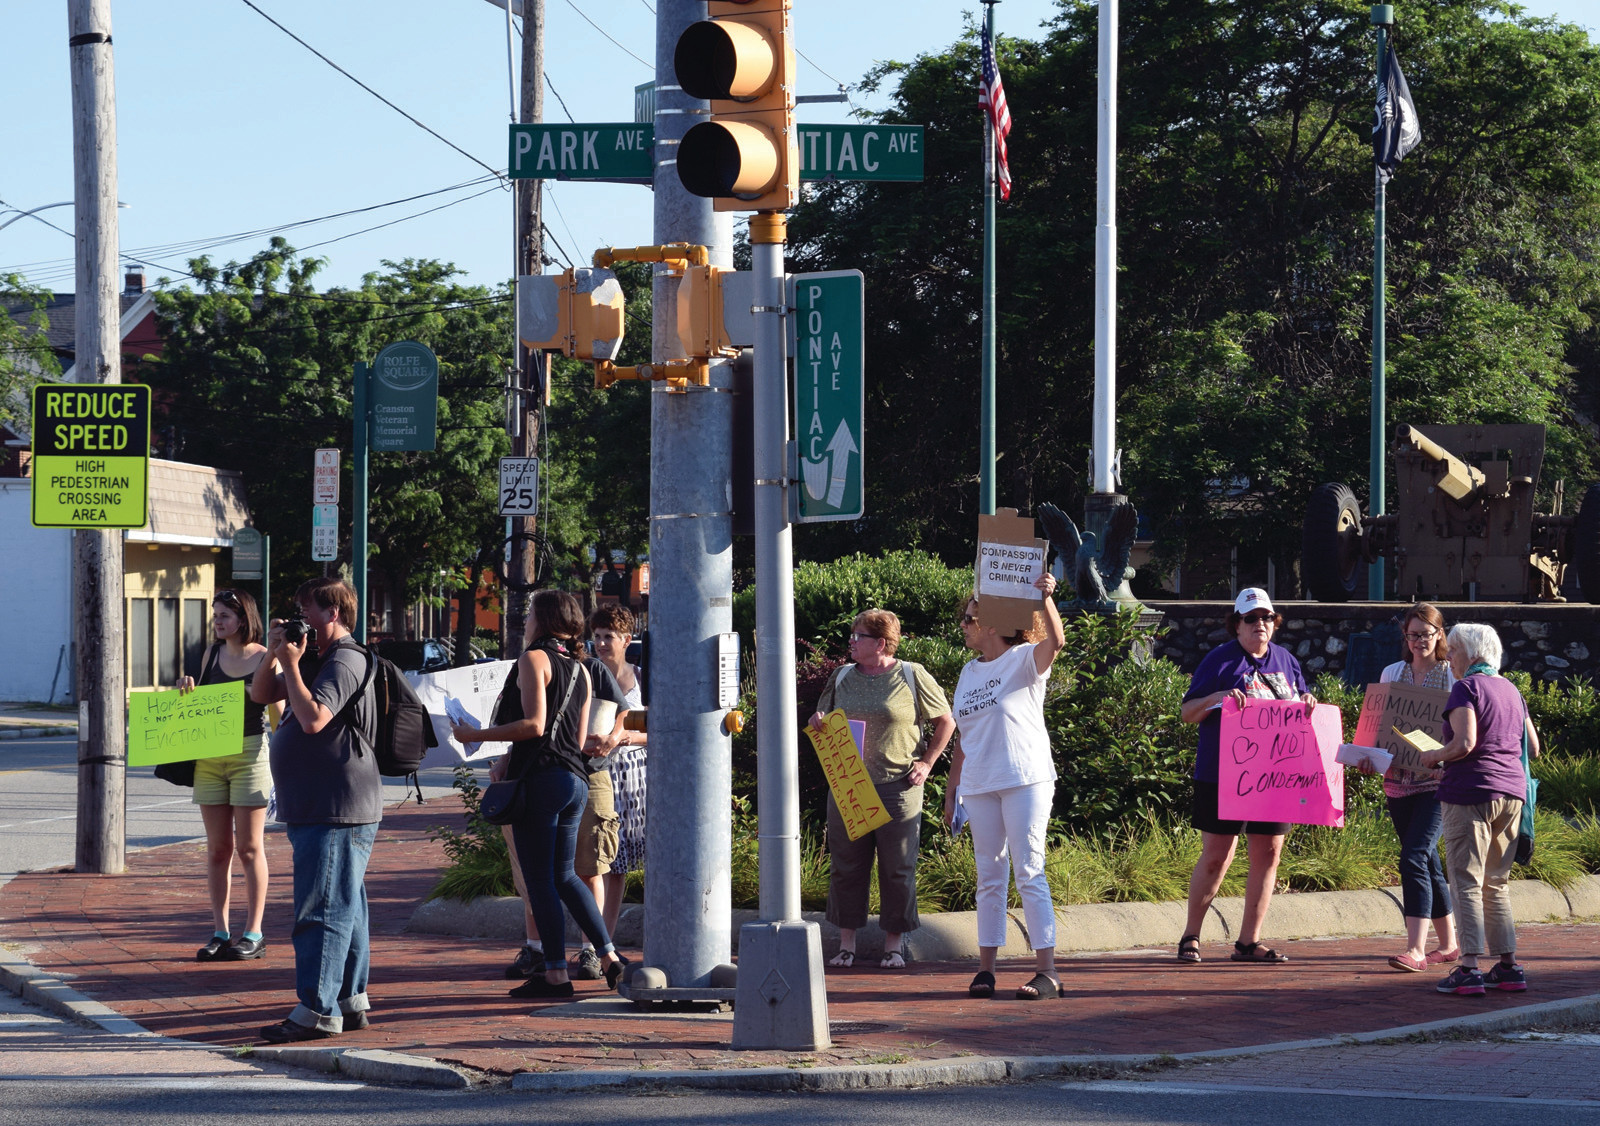 AT A CROSSROADS: Protesters gathered at the intersection of Pontiac Avenue, Park Avenue and Rolfe Square to speak out against the Cranston panhandling ordinance.